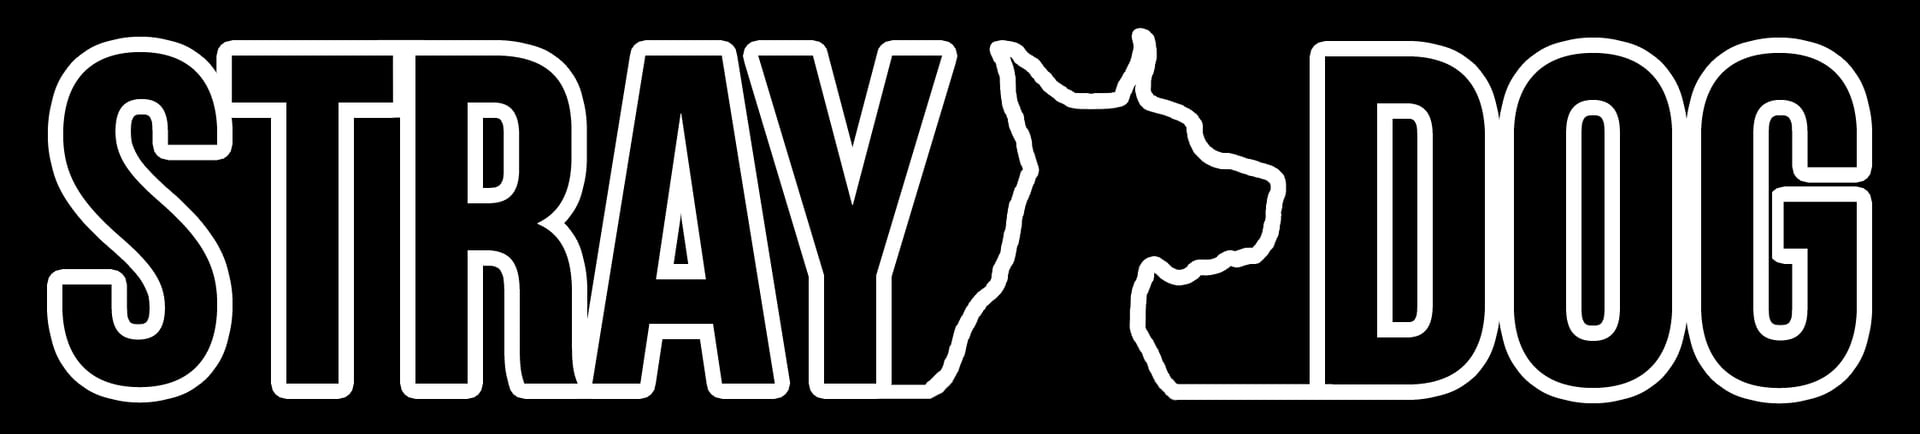 Black and tall lettering with a thick, bold white outline that spell out Stray Dog with a silhouette of a great dane in between the two words